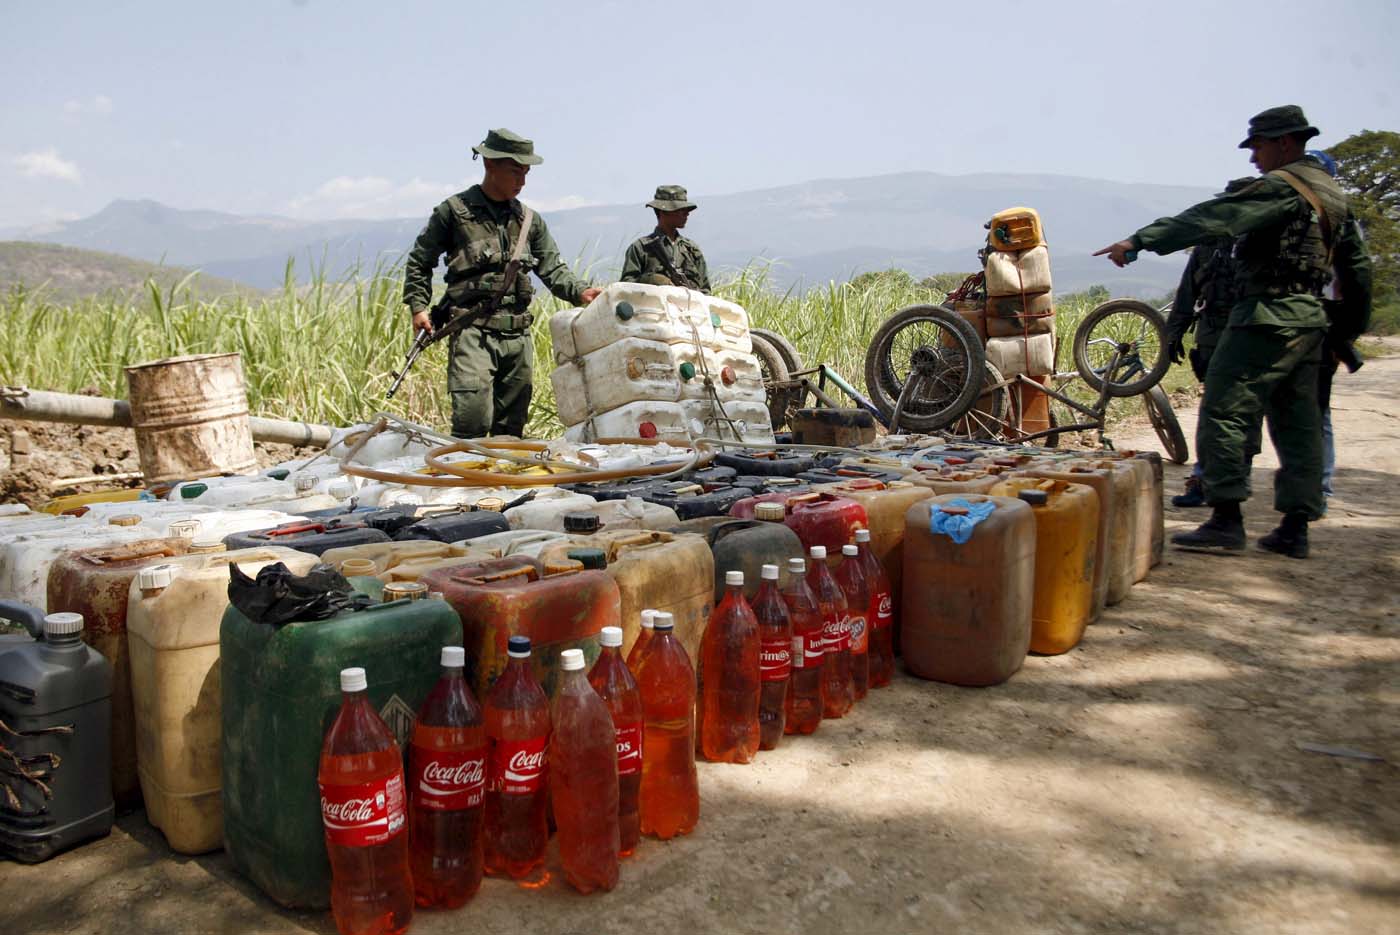 Venezuelan soldiers collect containers with gasoline abandoned by smugglers near the Colombian border in San Antonio, in the state of Tachira, February 17, 2016. REUTERS/Carlos Eduardo Ramirez. EDITORIAL USE ONLY. NO RESALES. NO ARCHIVE.